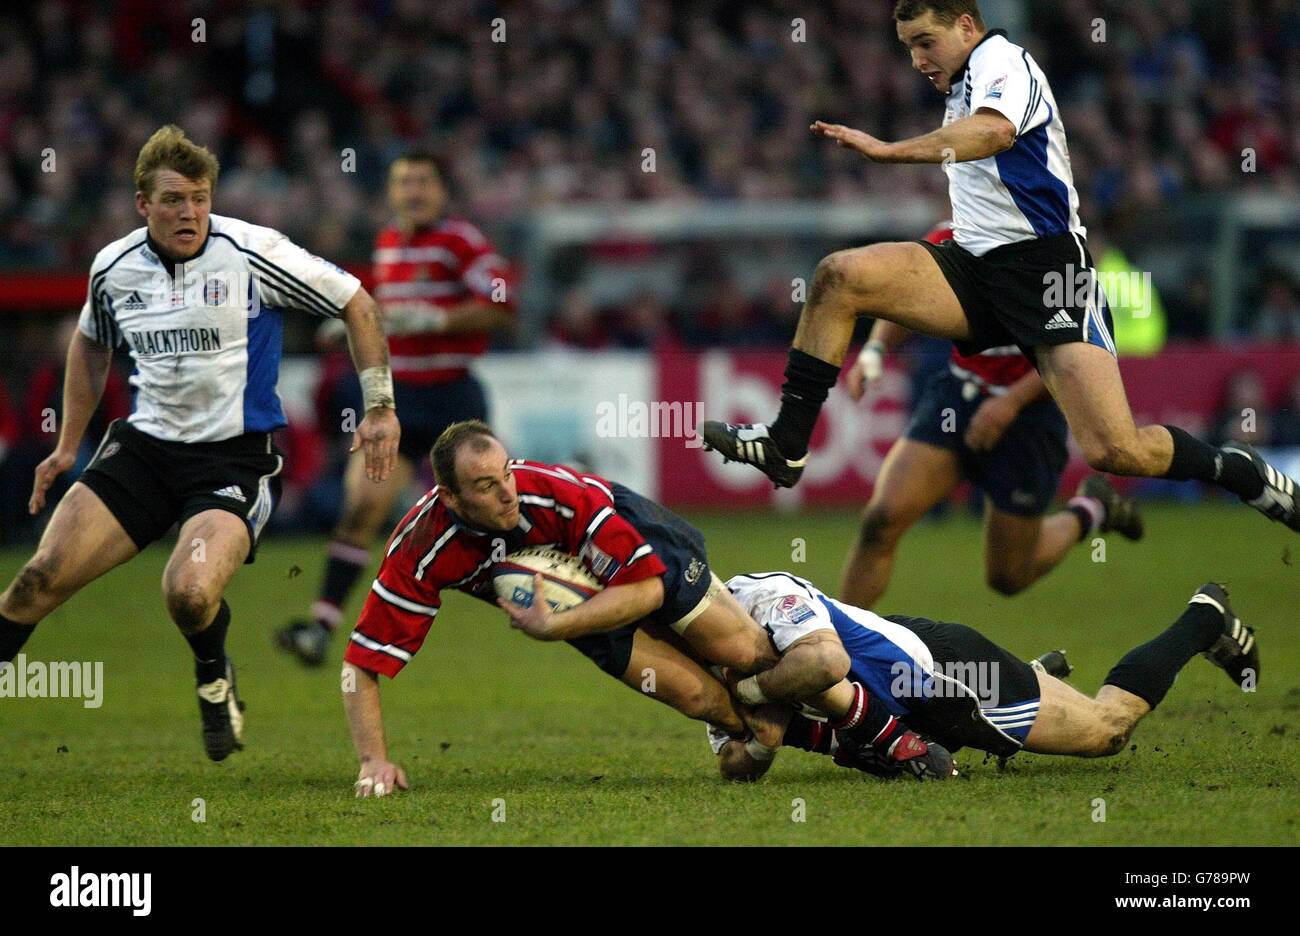 Gloucester's Ludovis Mercier is tackled by Bath's Mike Catt as Ollie Barkley jumps over them, during the Zurich Premiership match at Gloucester's Kingsholm stadium. Stock Photo